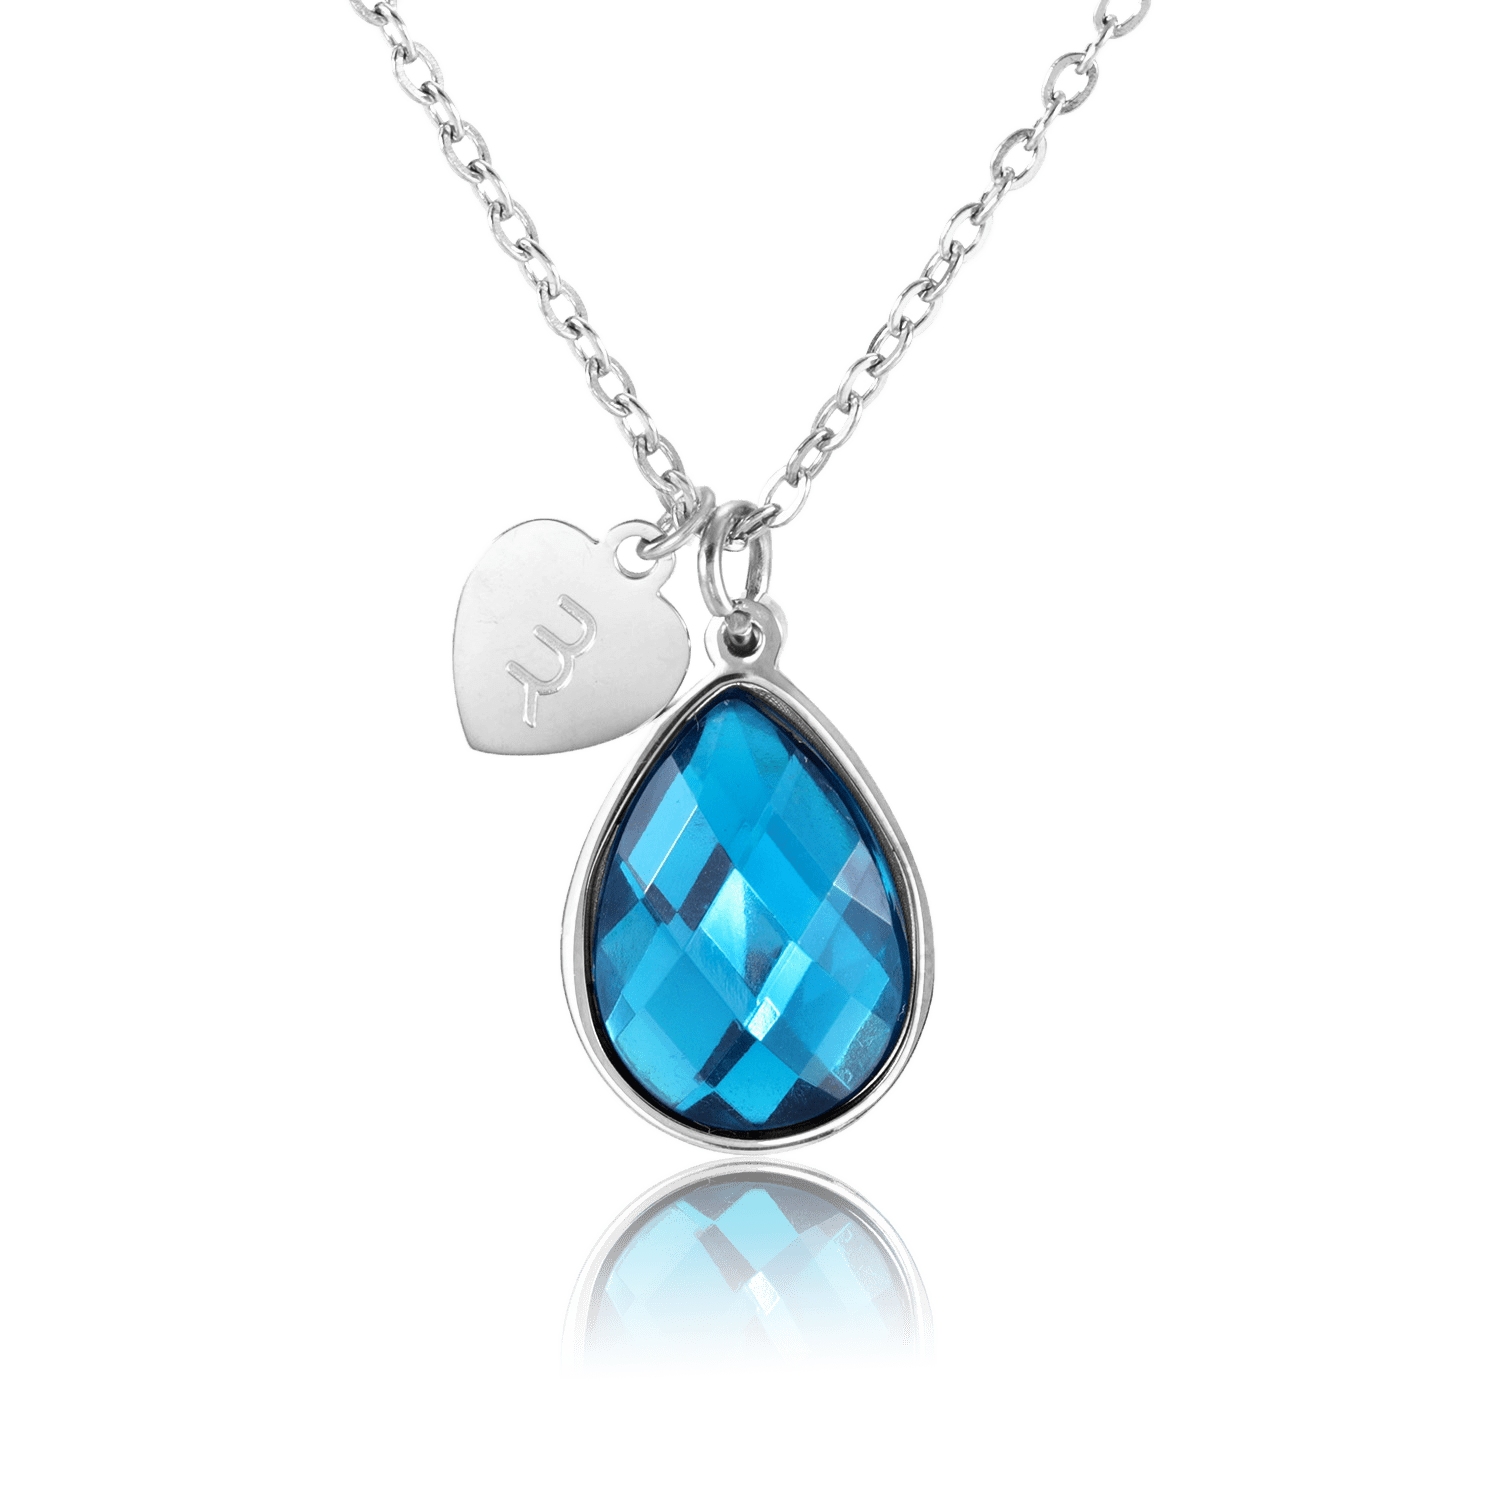 bianco rosso Necklaces Silver March Birthstone - Aquamarine cyprus greece jewelry gift free shipping europe worldwide